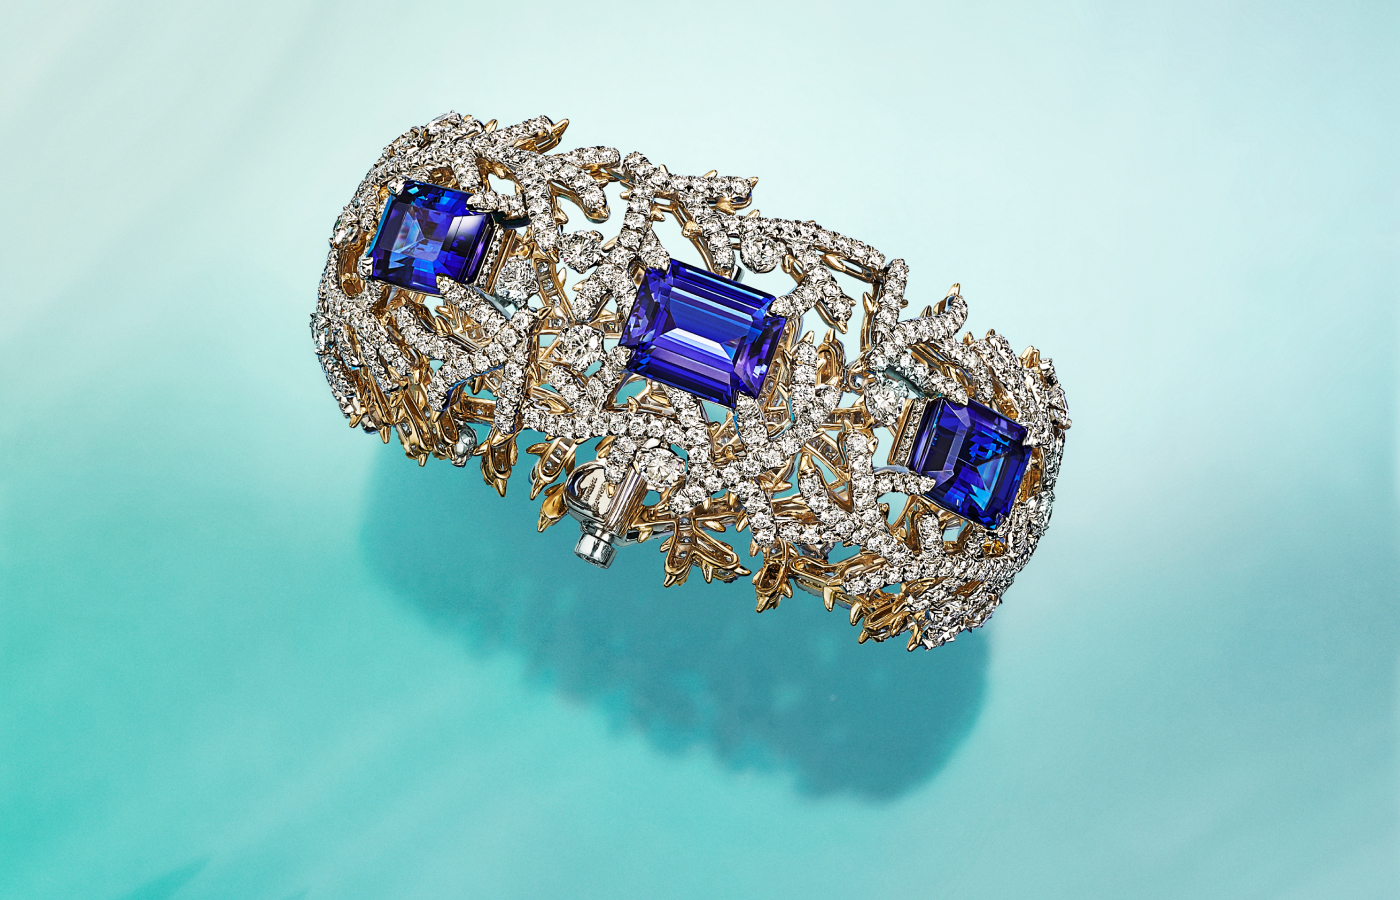 Tiffany & Co. bracelet in gold, diamond and tanzanite from the Blue Book 2023: Out of the Blue high jewellery collection